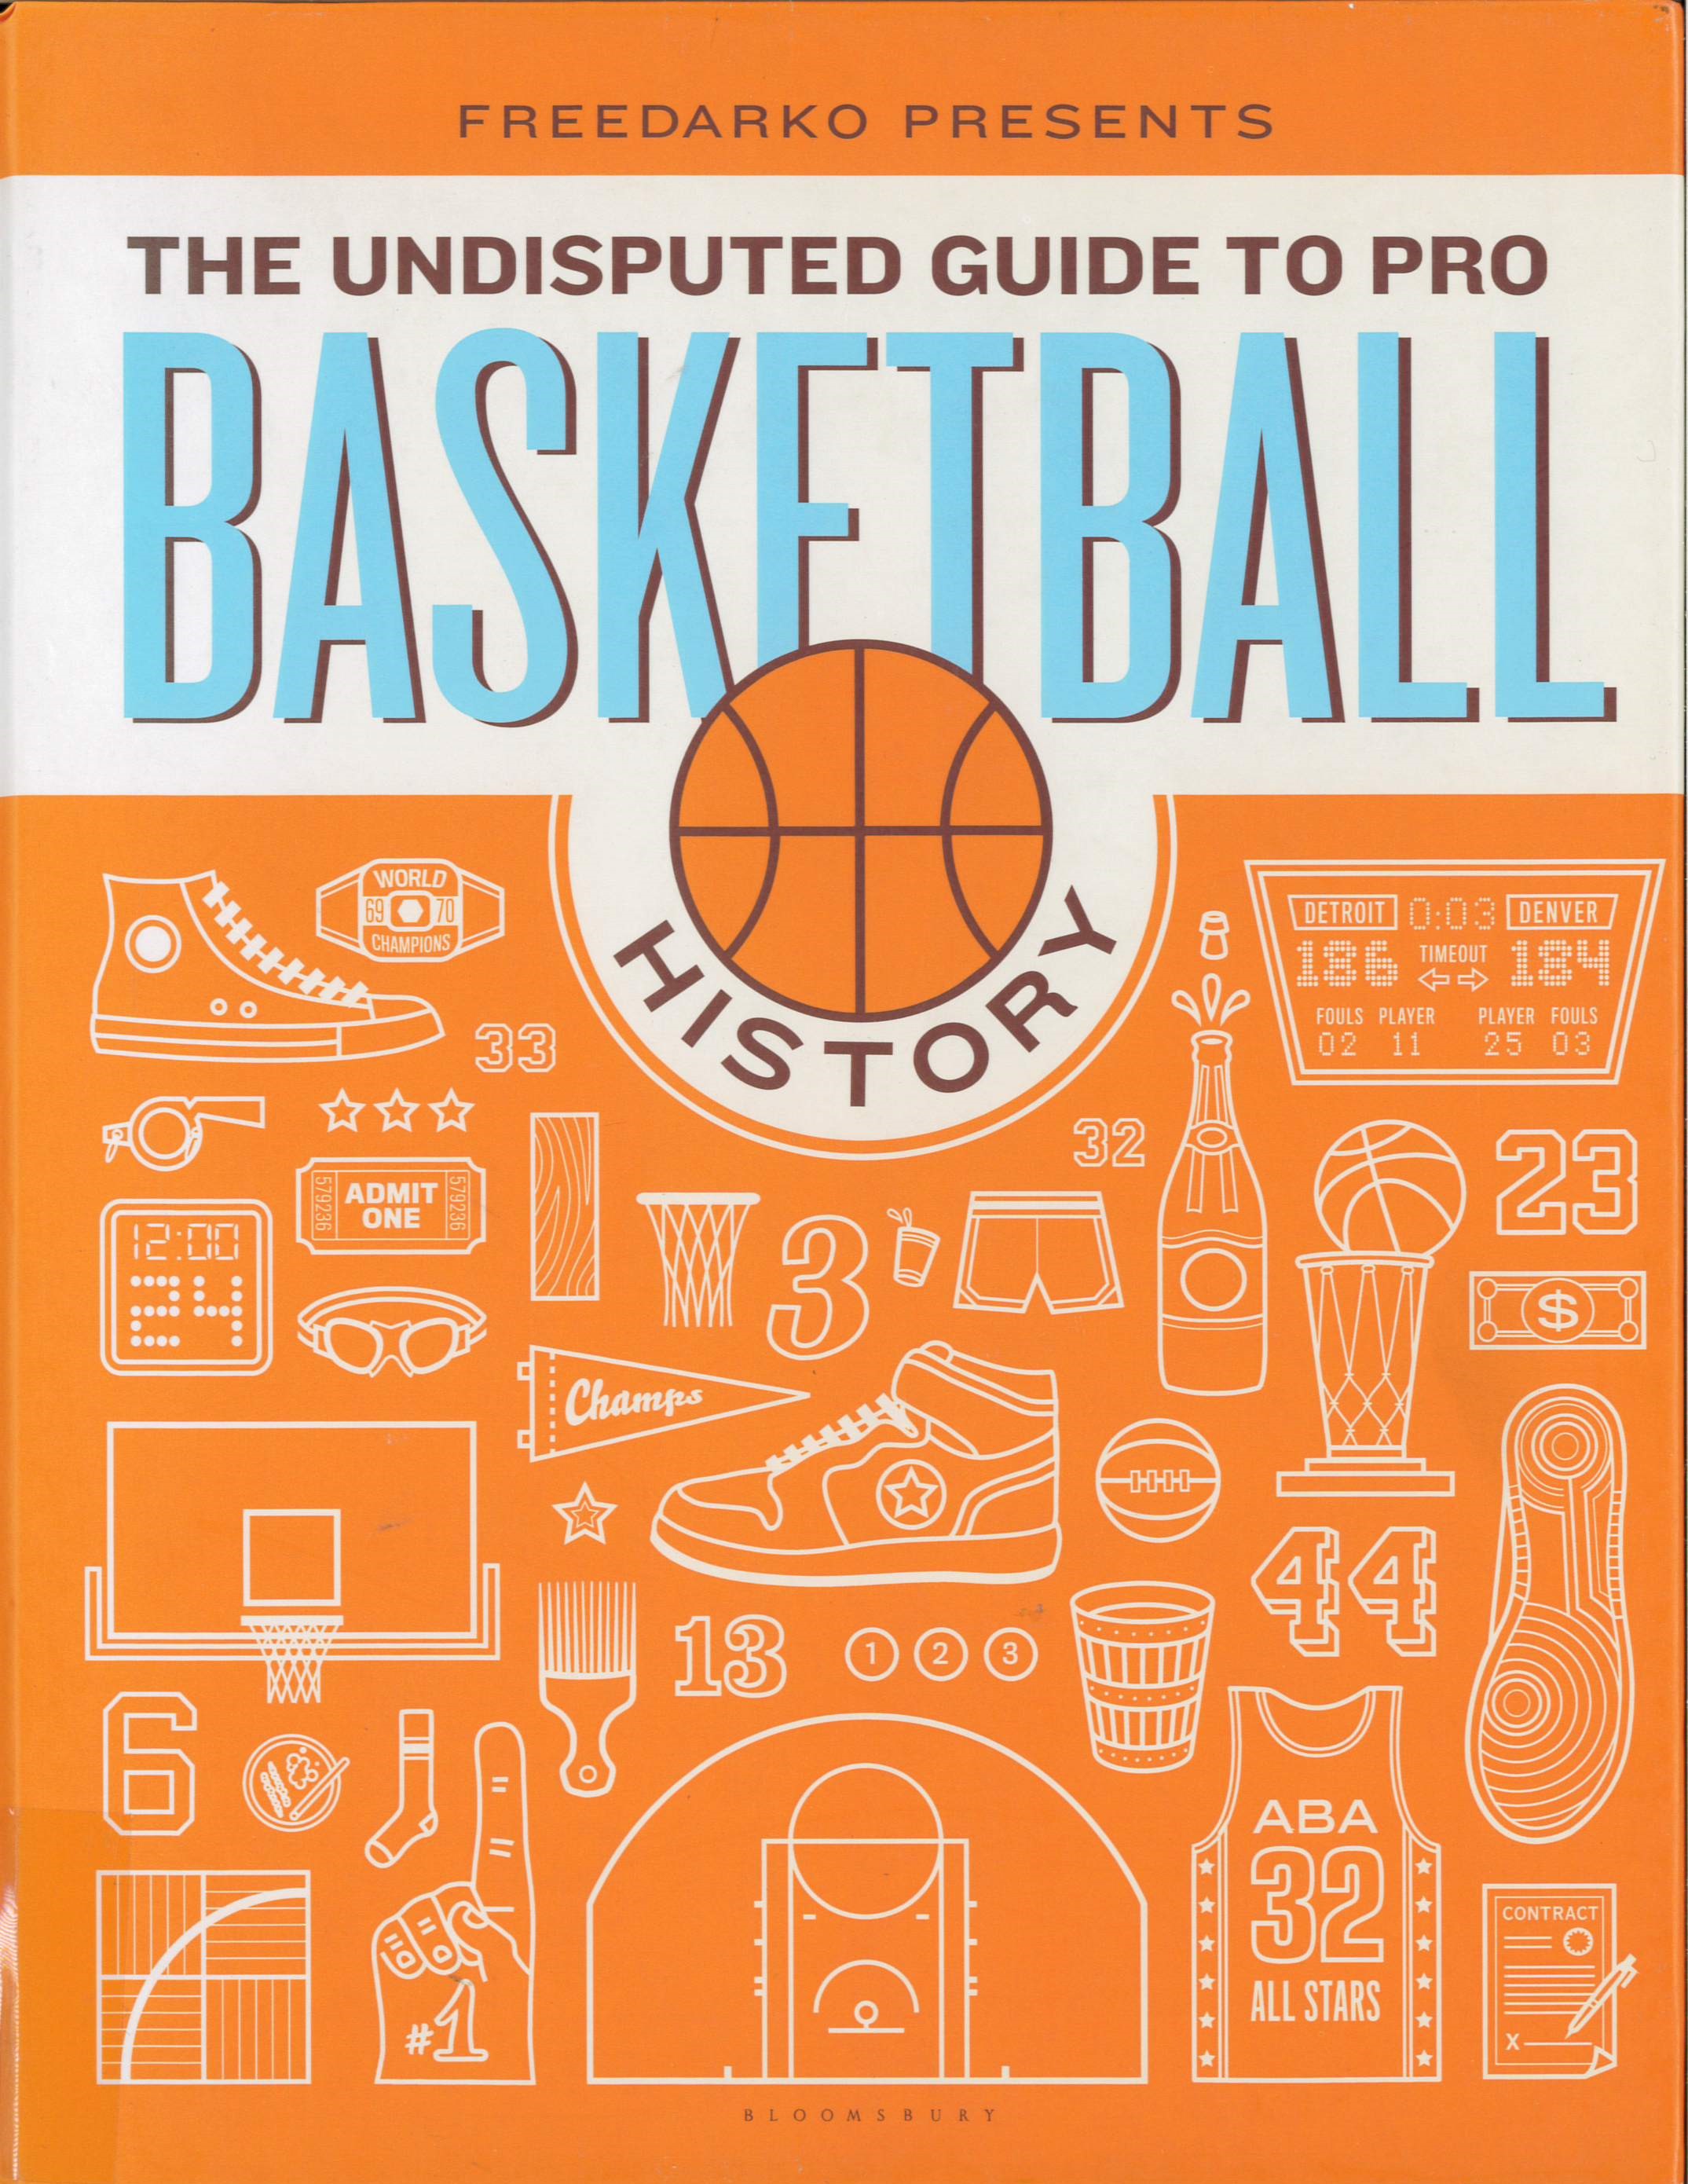 The undisputed guide to pro basketball history